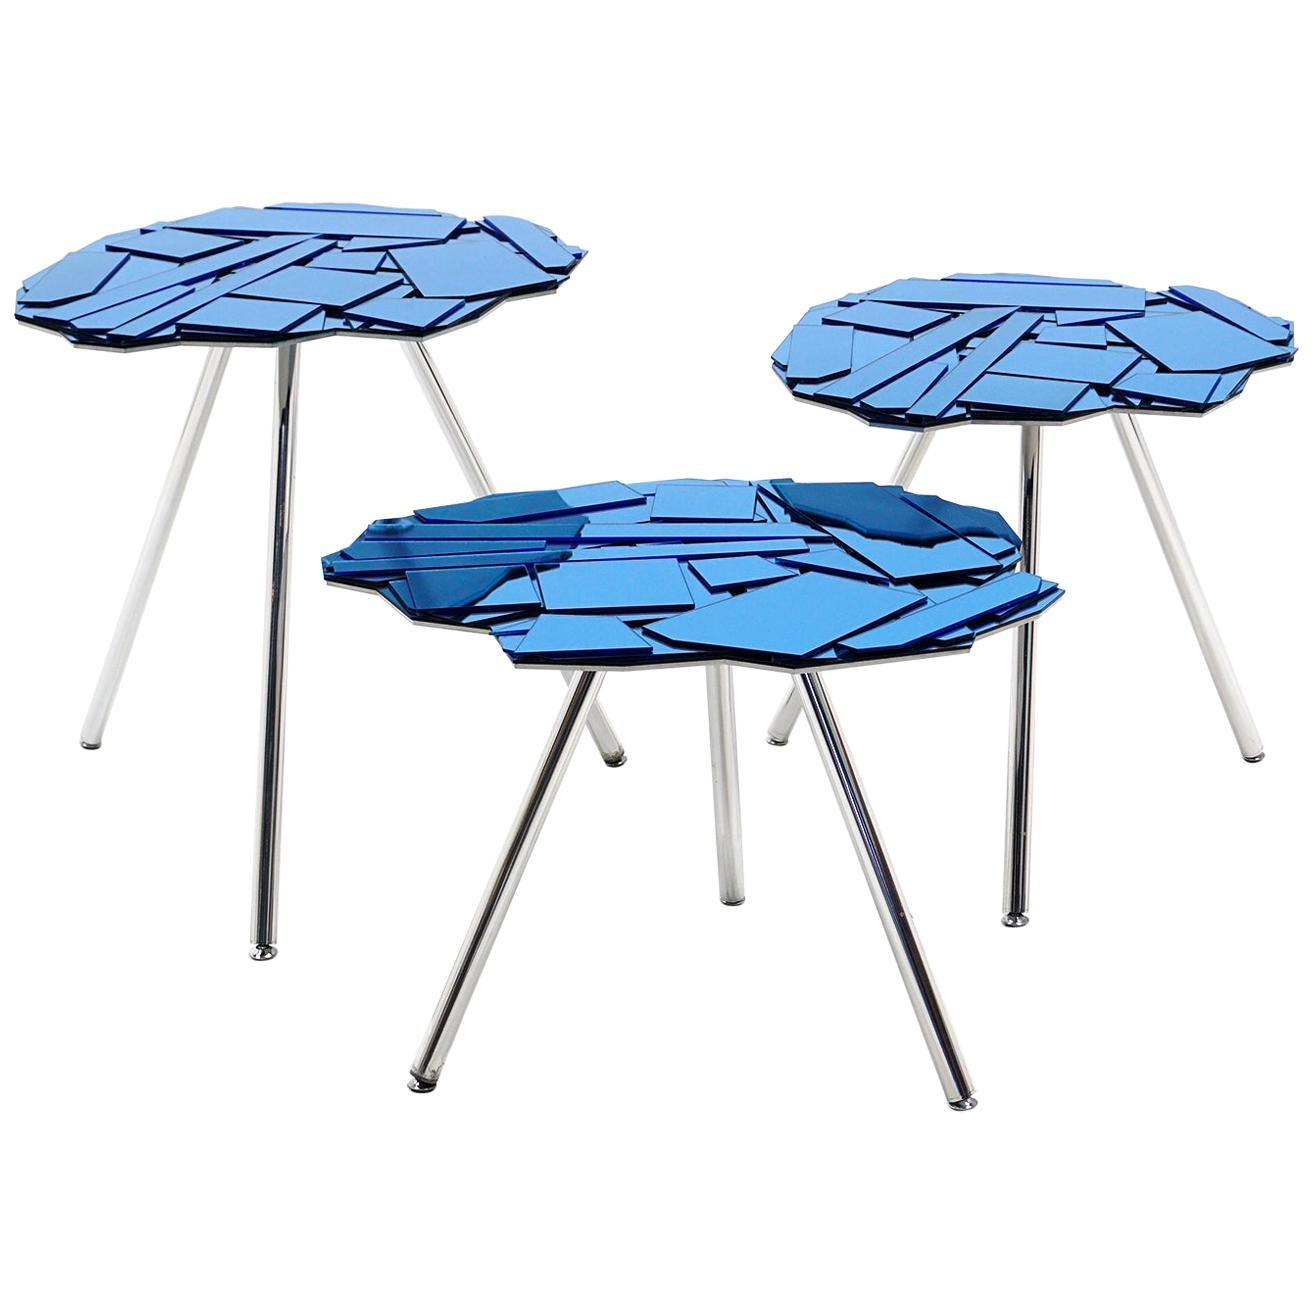 Brasilia Nesting Tables, Three, by The Campana Brothers, Blue Glass Tops, Chrome